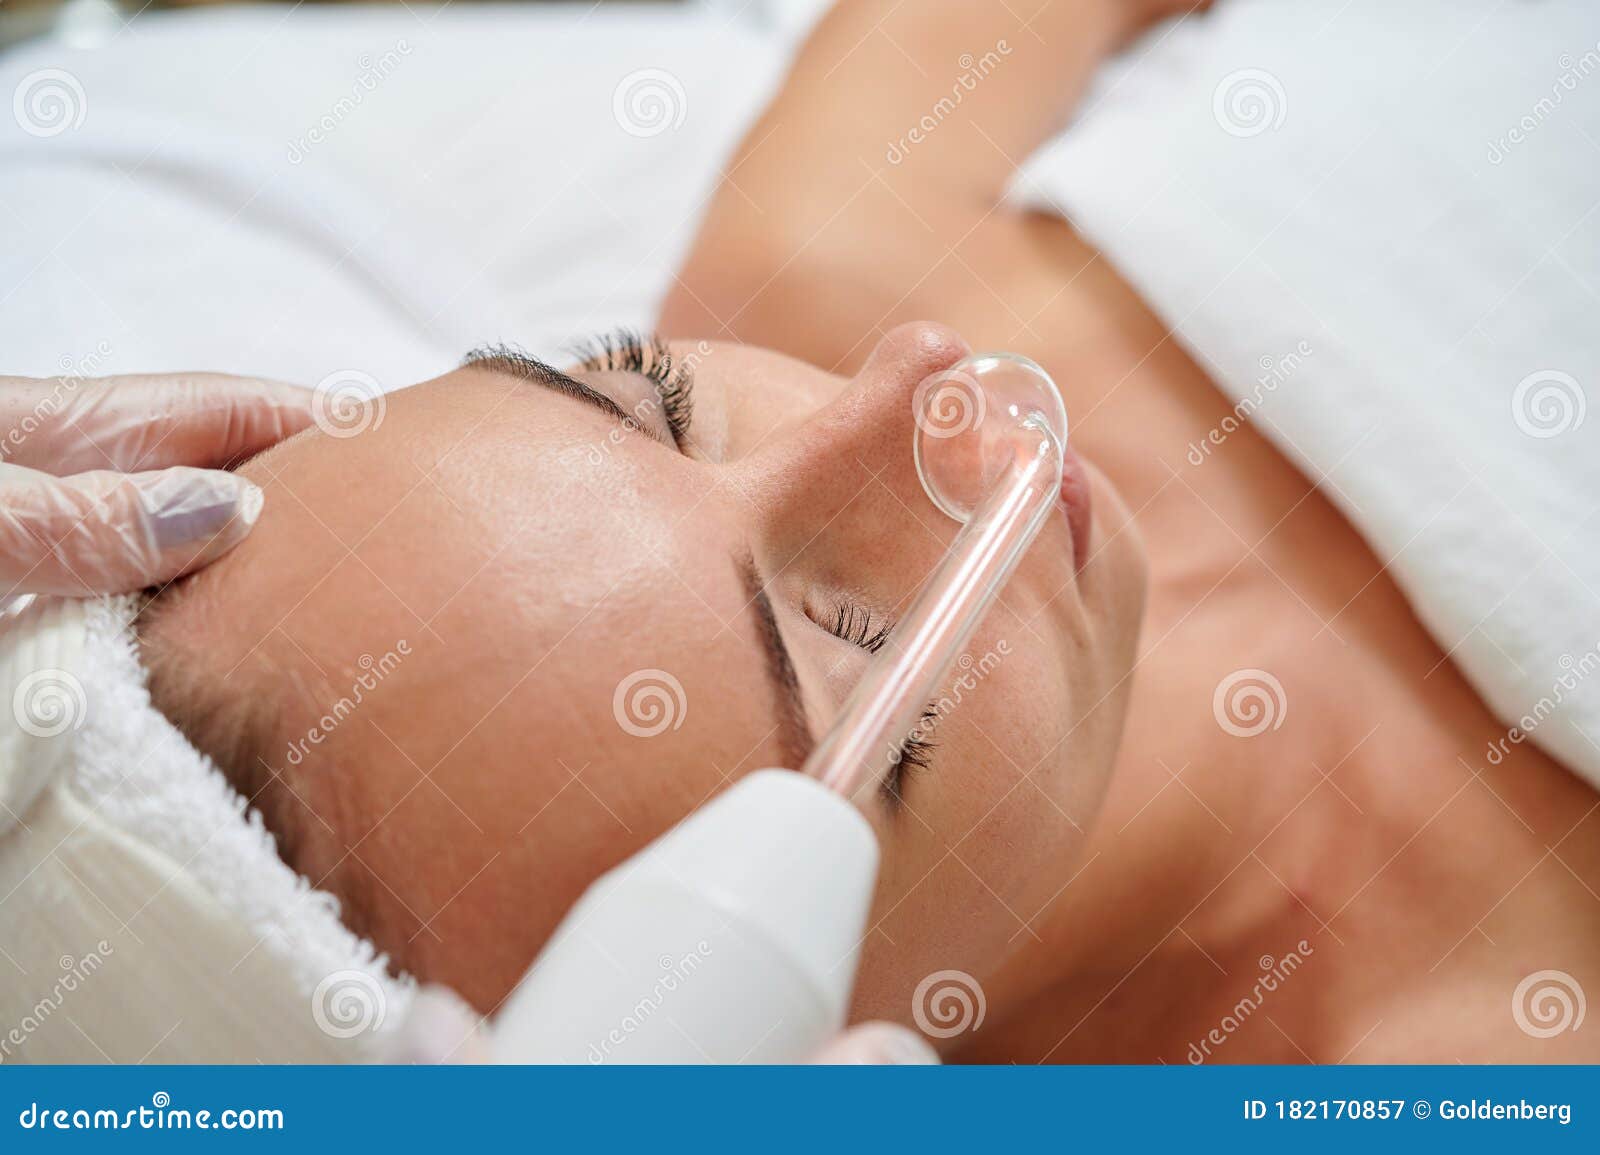 female receiving galvanic facial treatment in spa cosmetologist wearing gloves professional services